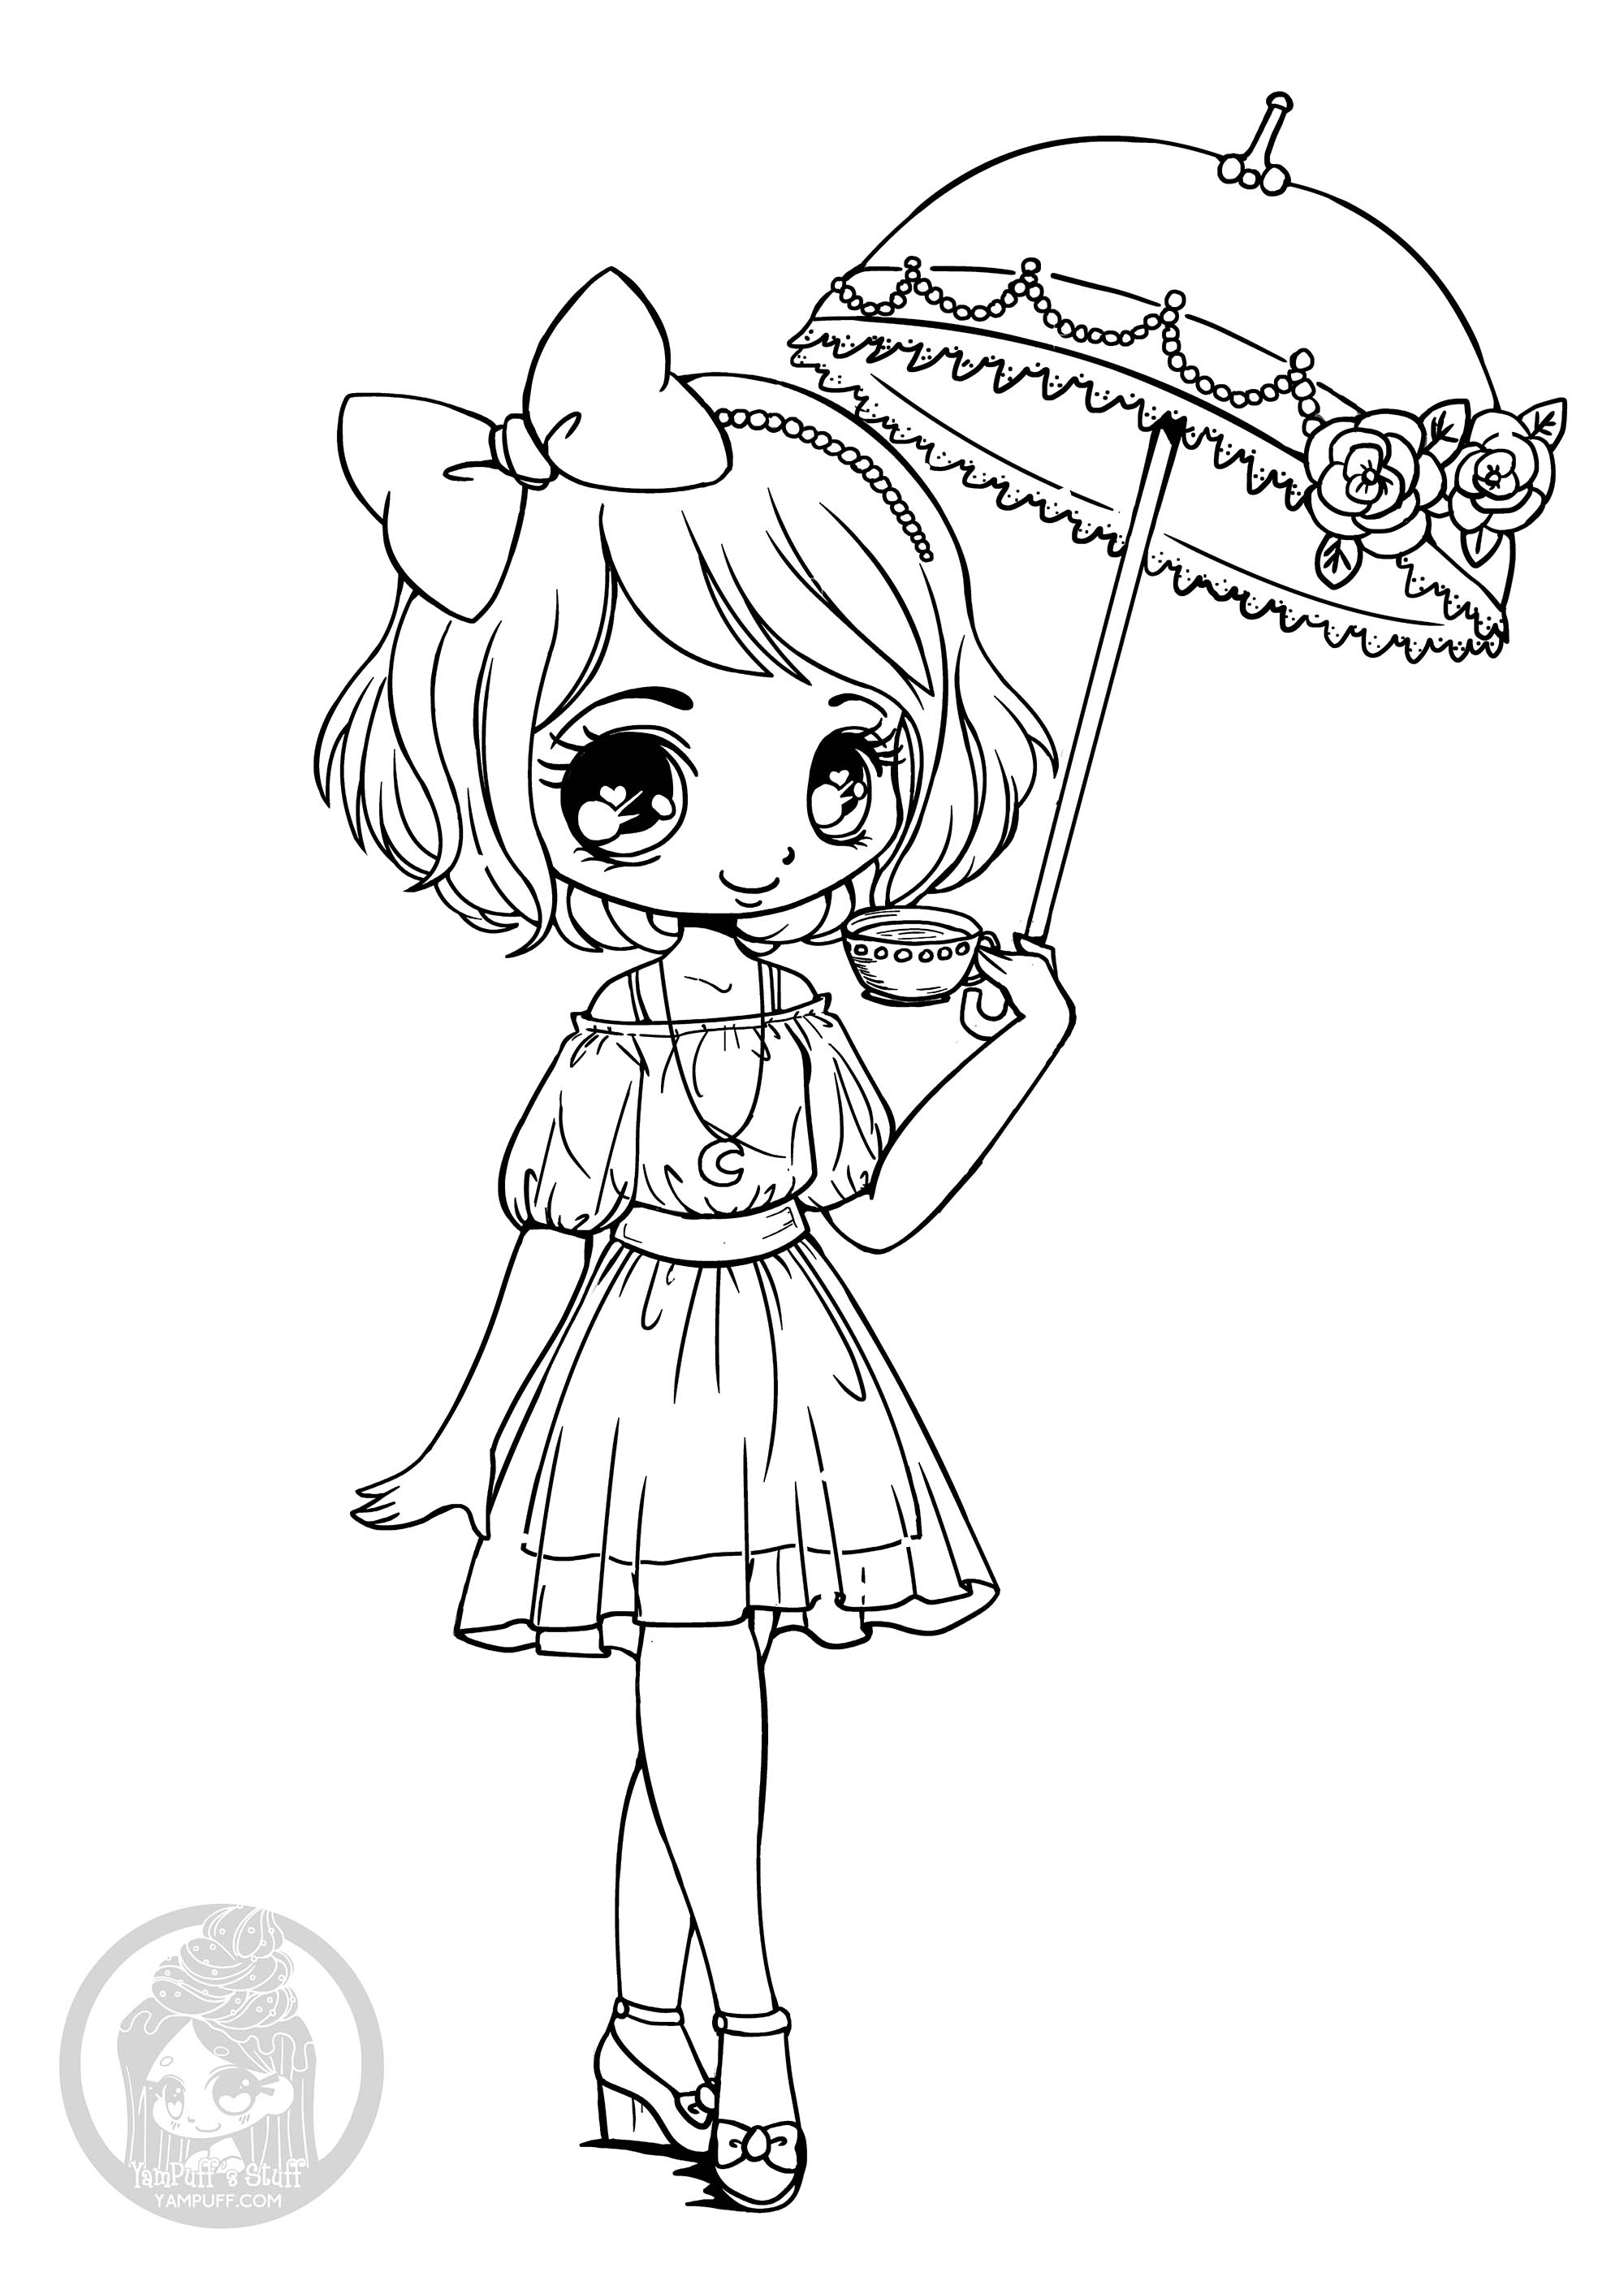 Download Kawaii to download for free - Kawaii Kids Coloring Pages